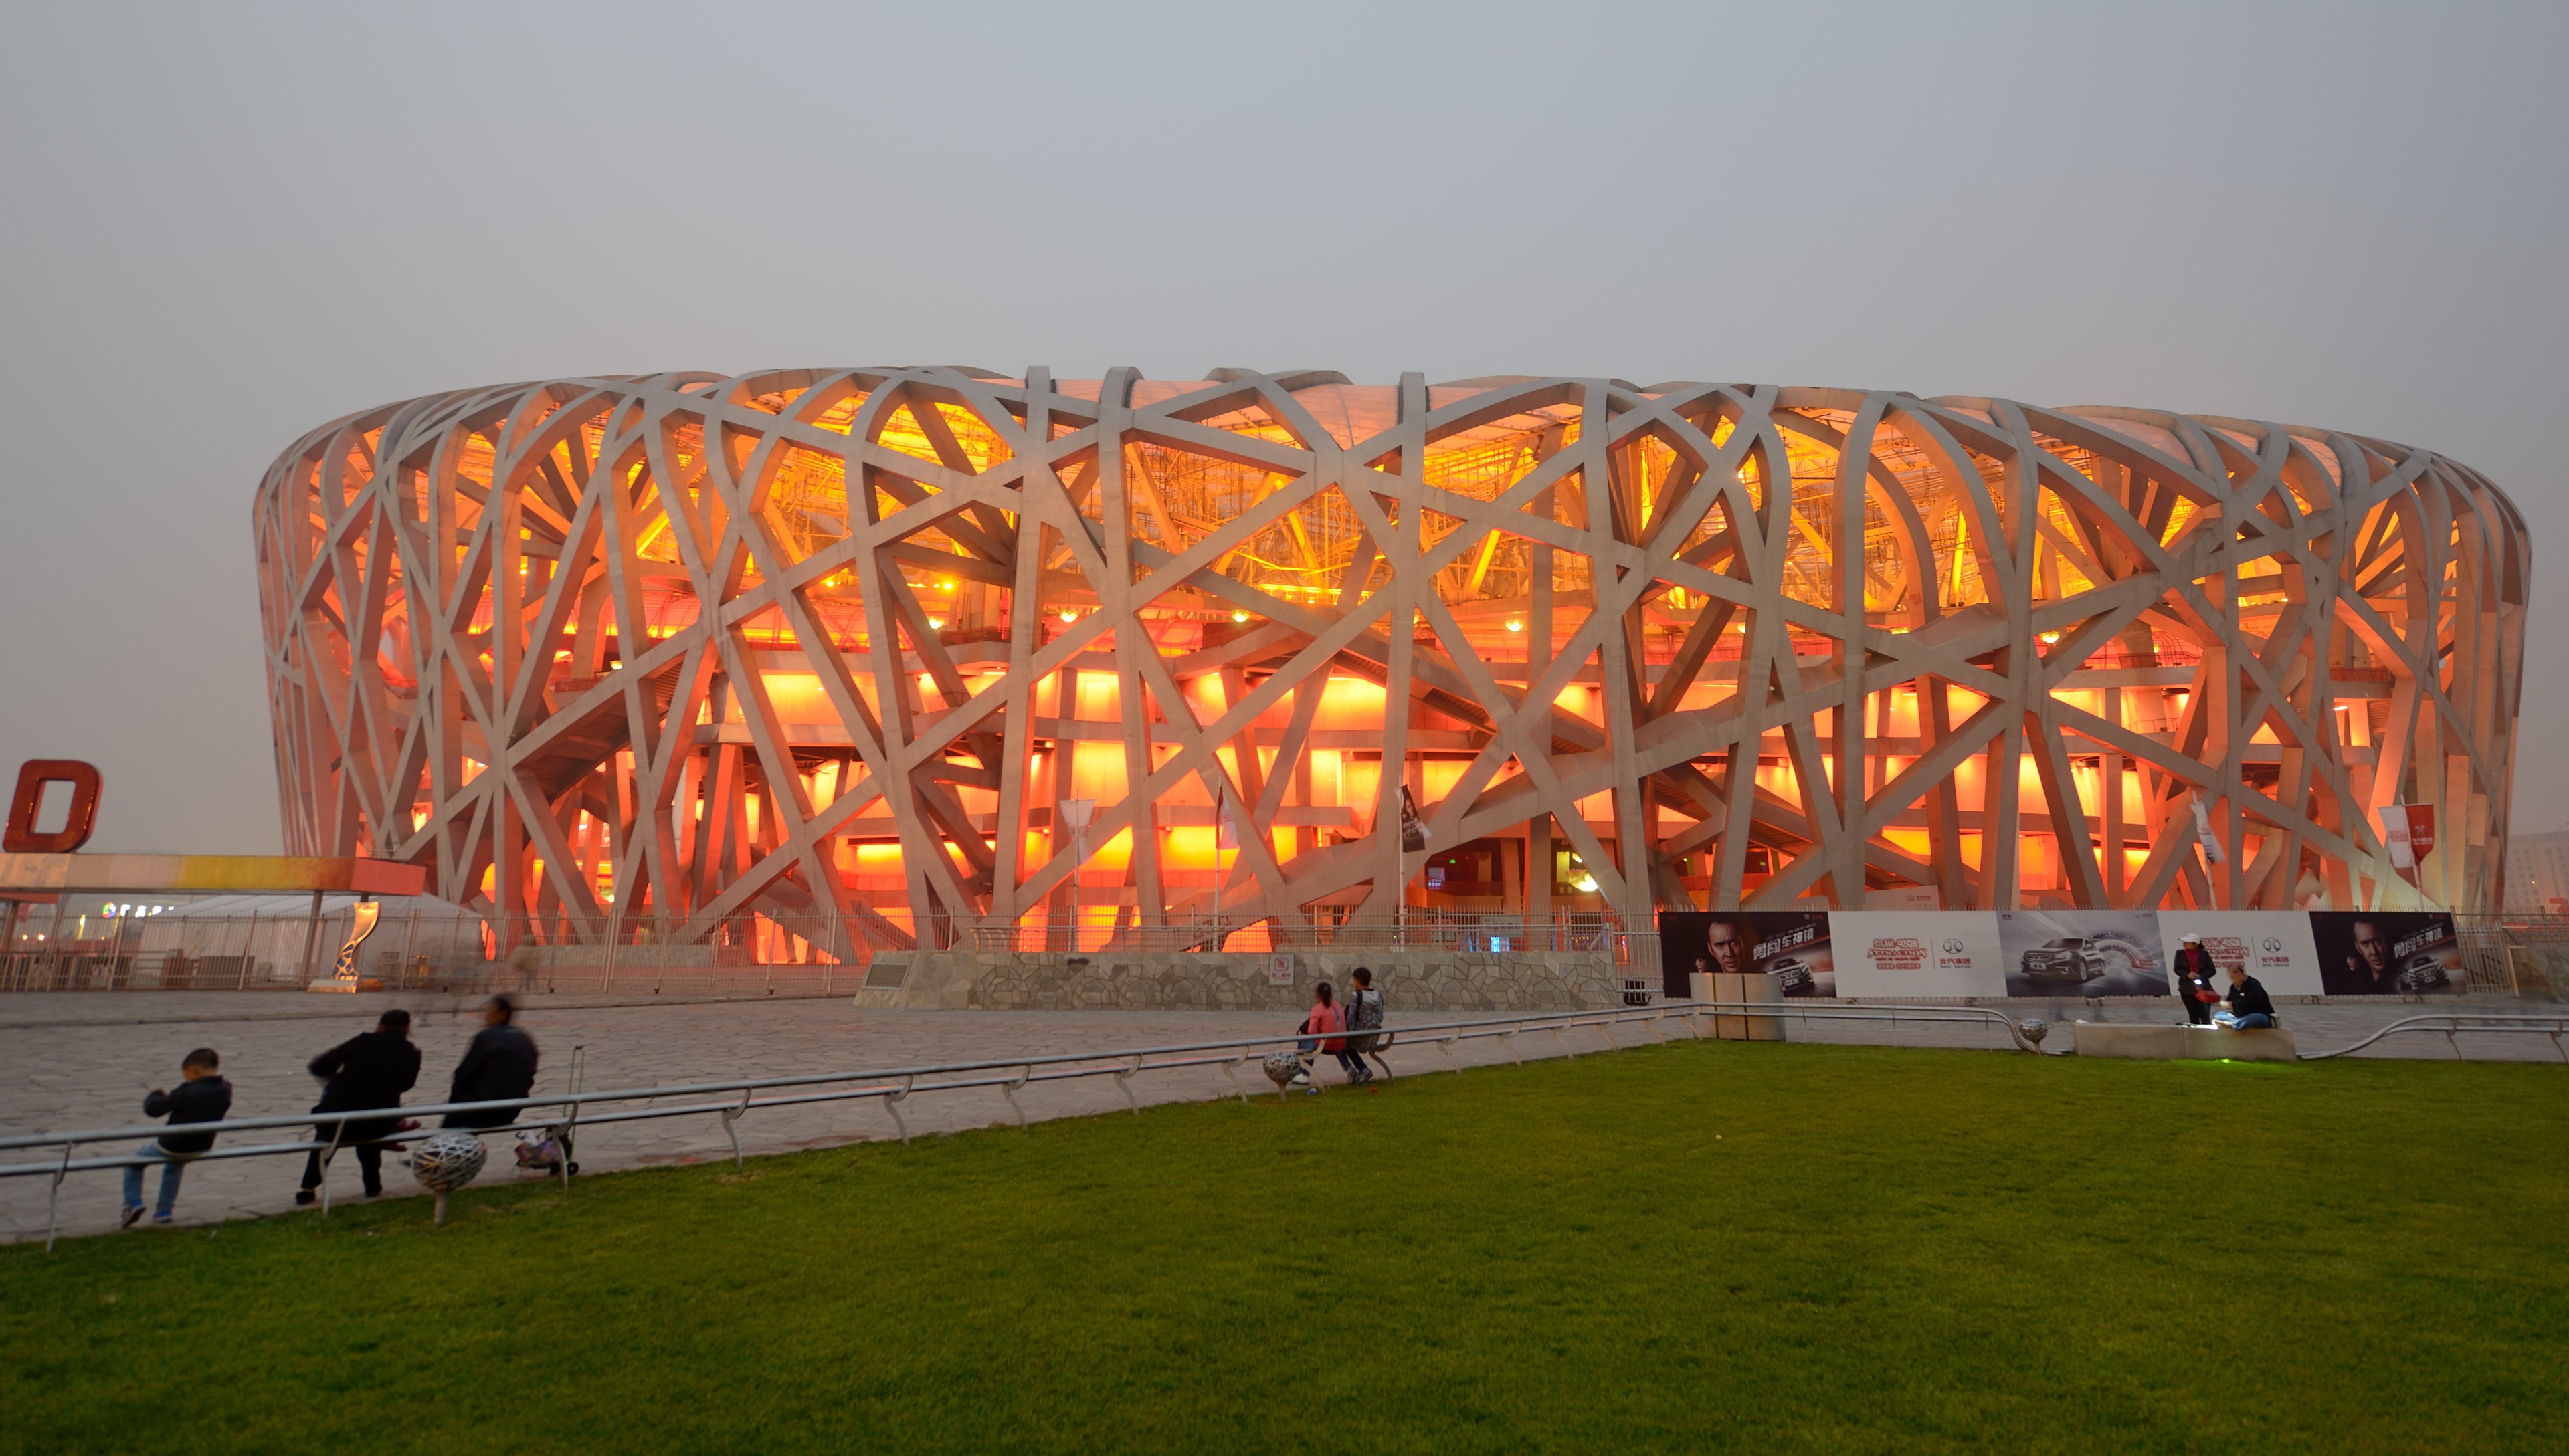 CHINA, BEIJING - OCTOBER 08 : The Beijing National Stadium, aka the Bird's Nest, was designed for use throughout the 2008 Summer Olympics and Paralympics in Beijing on October 08, 2016 in China. (Photo by Frédéric Soltan/Corbis via Getty Images)